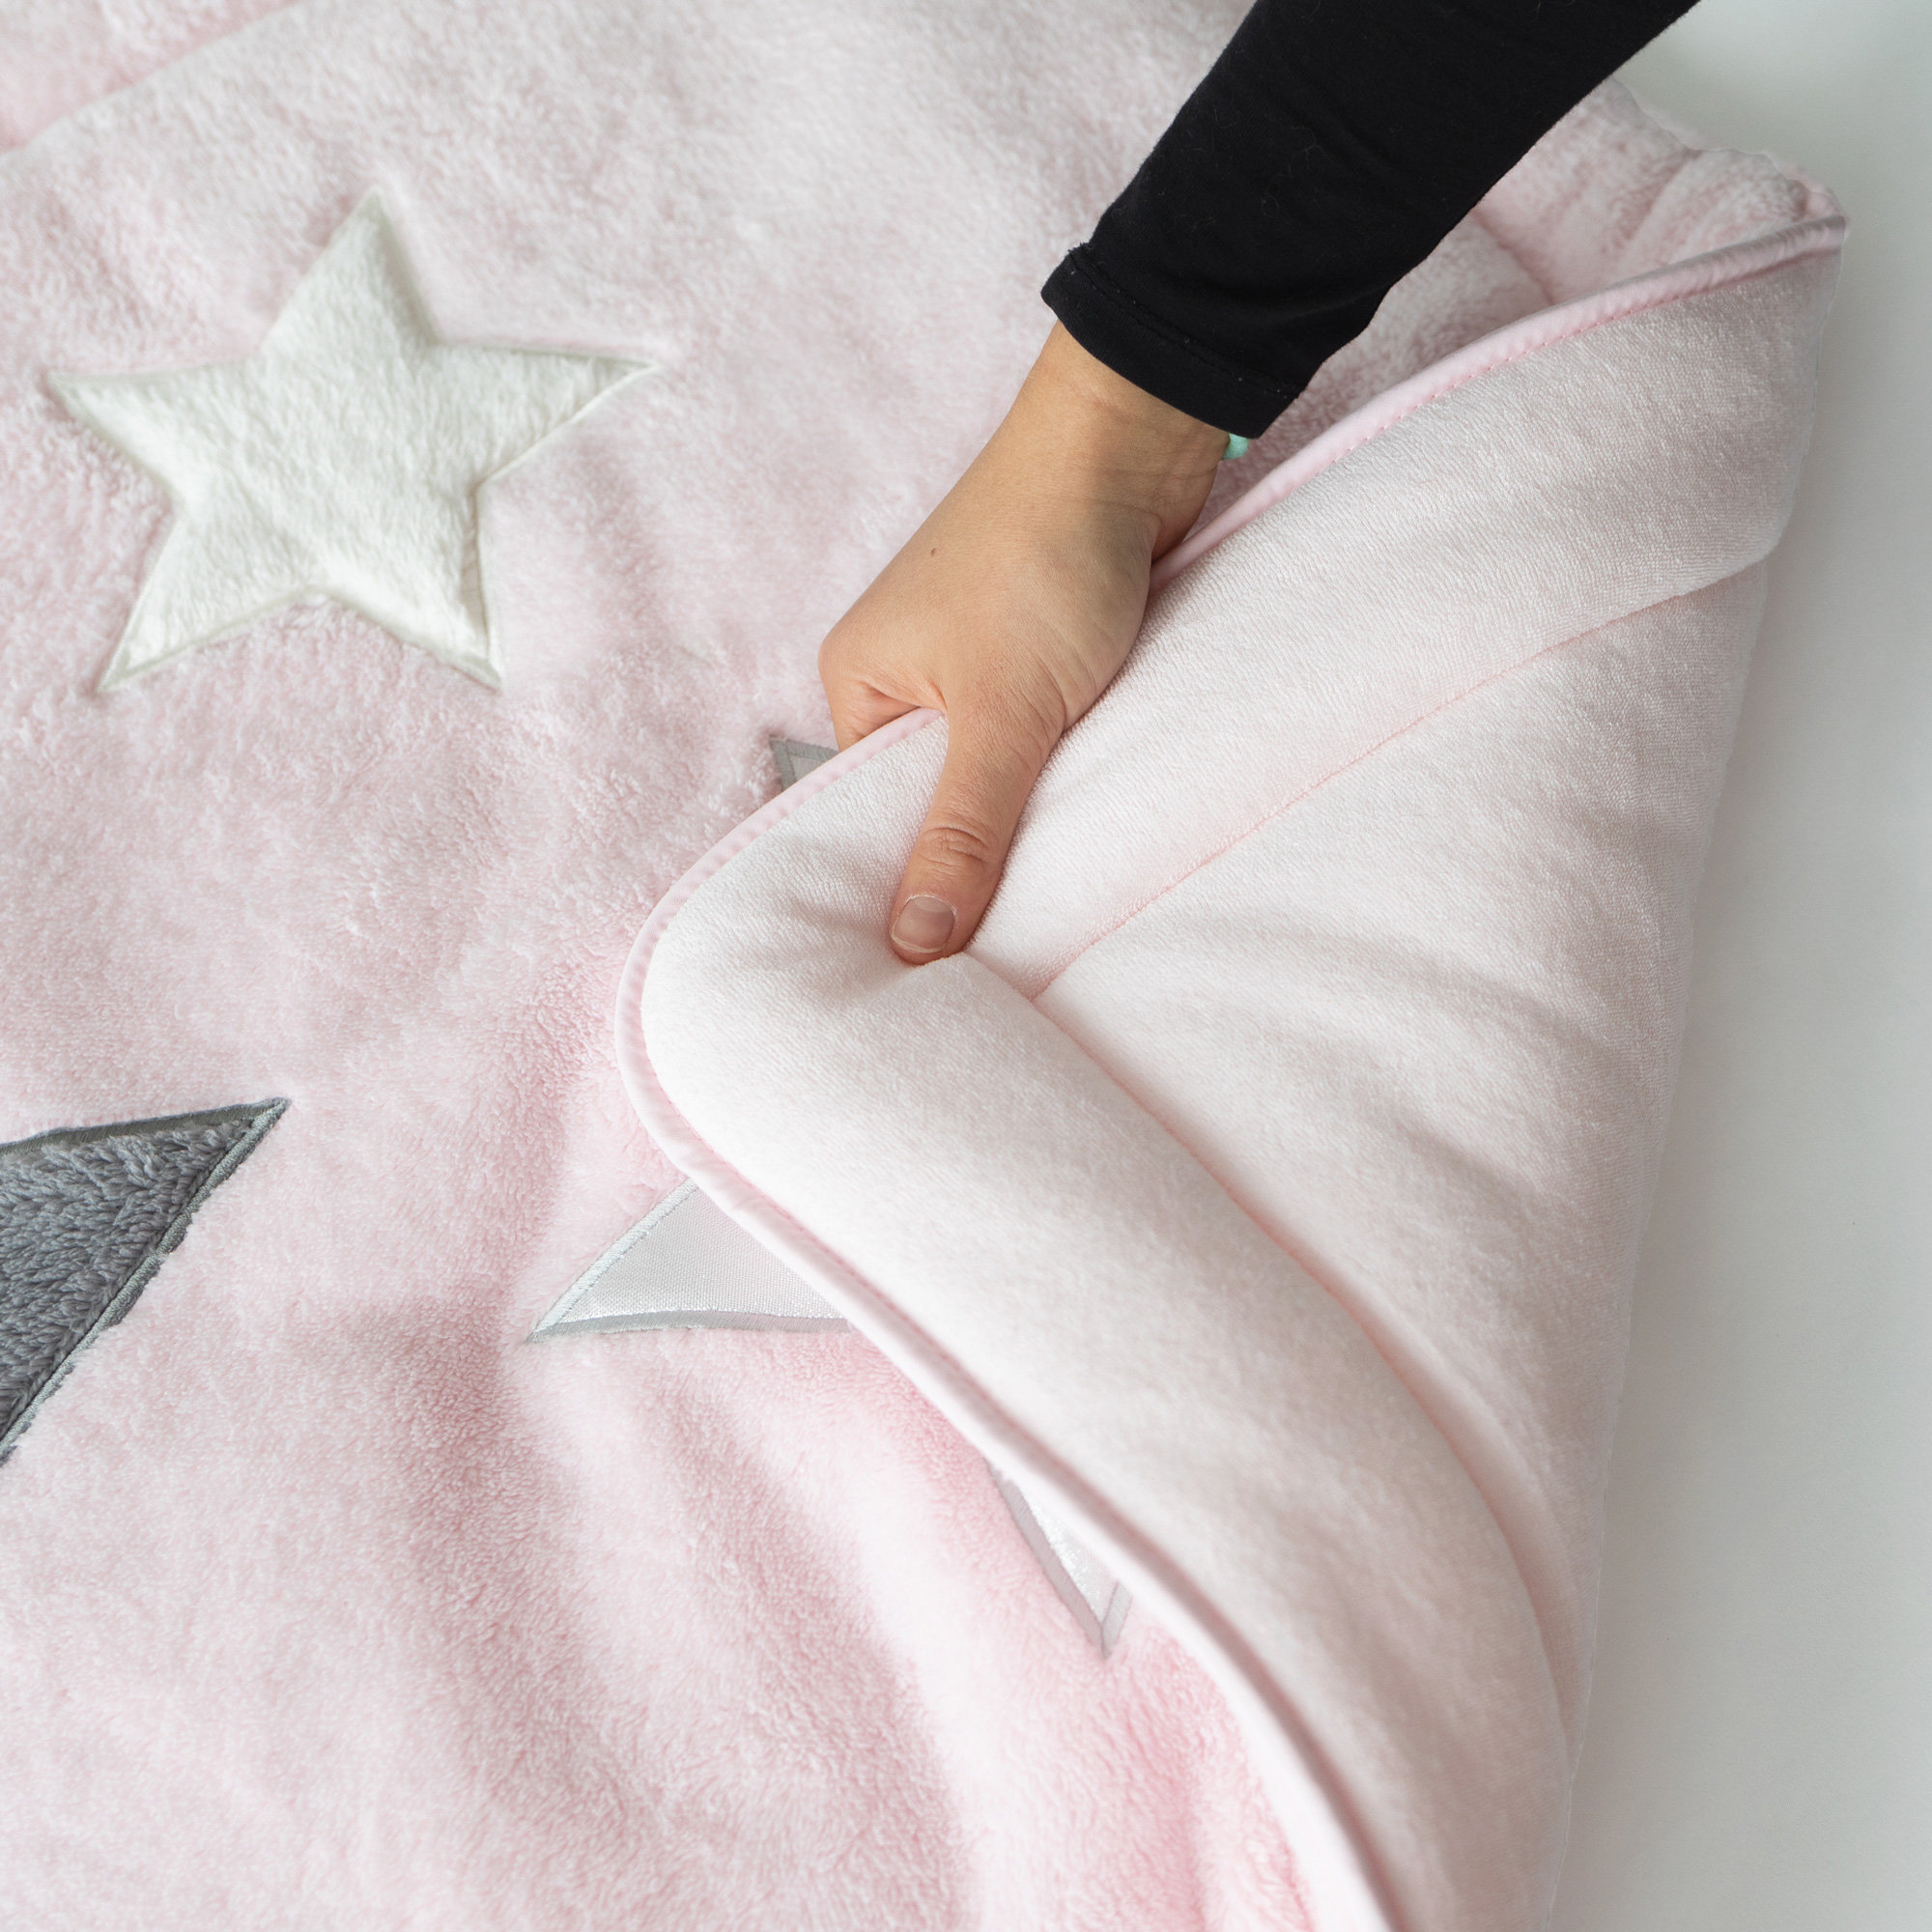 Padded play mat Pady softy + terry 75x95cm STARY Little stars print cristal[AWARENESS]